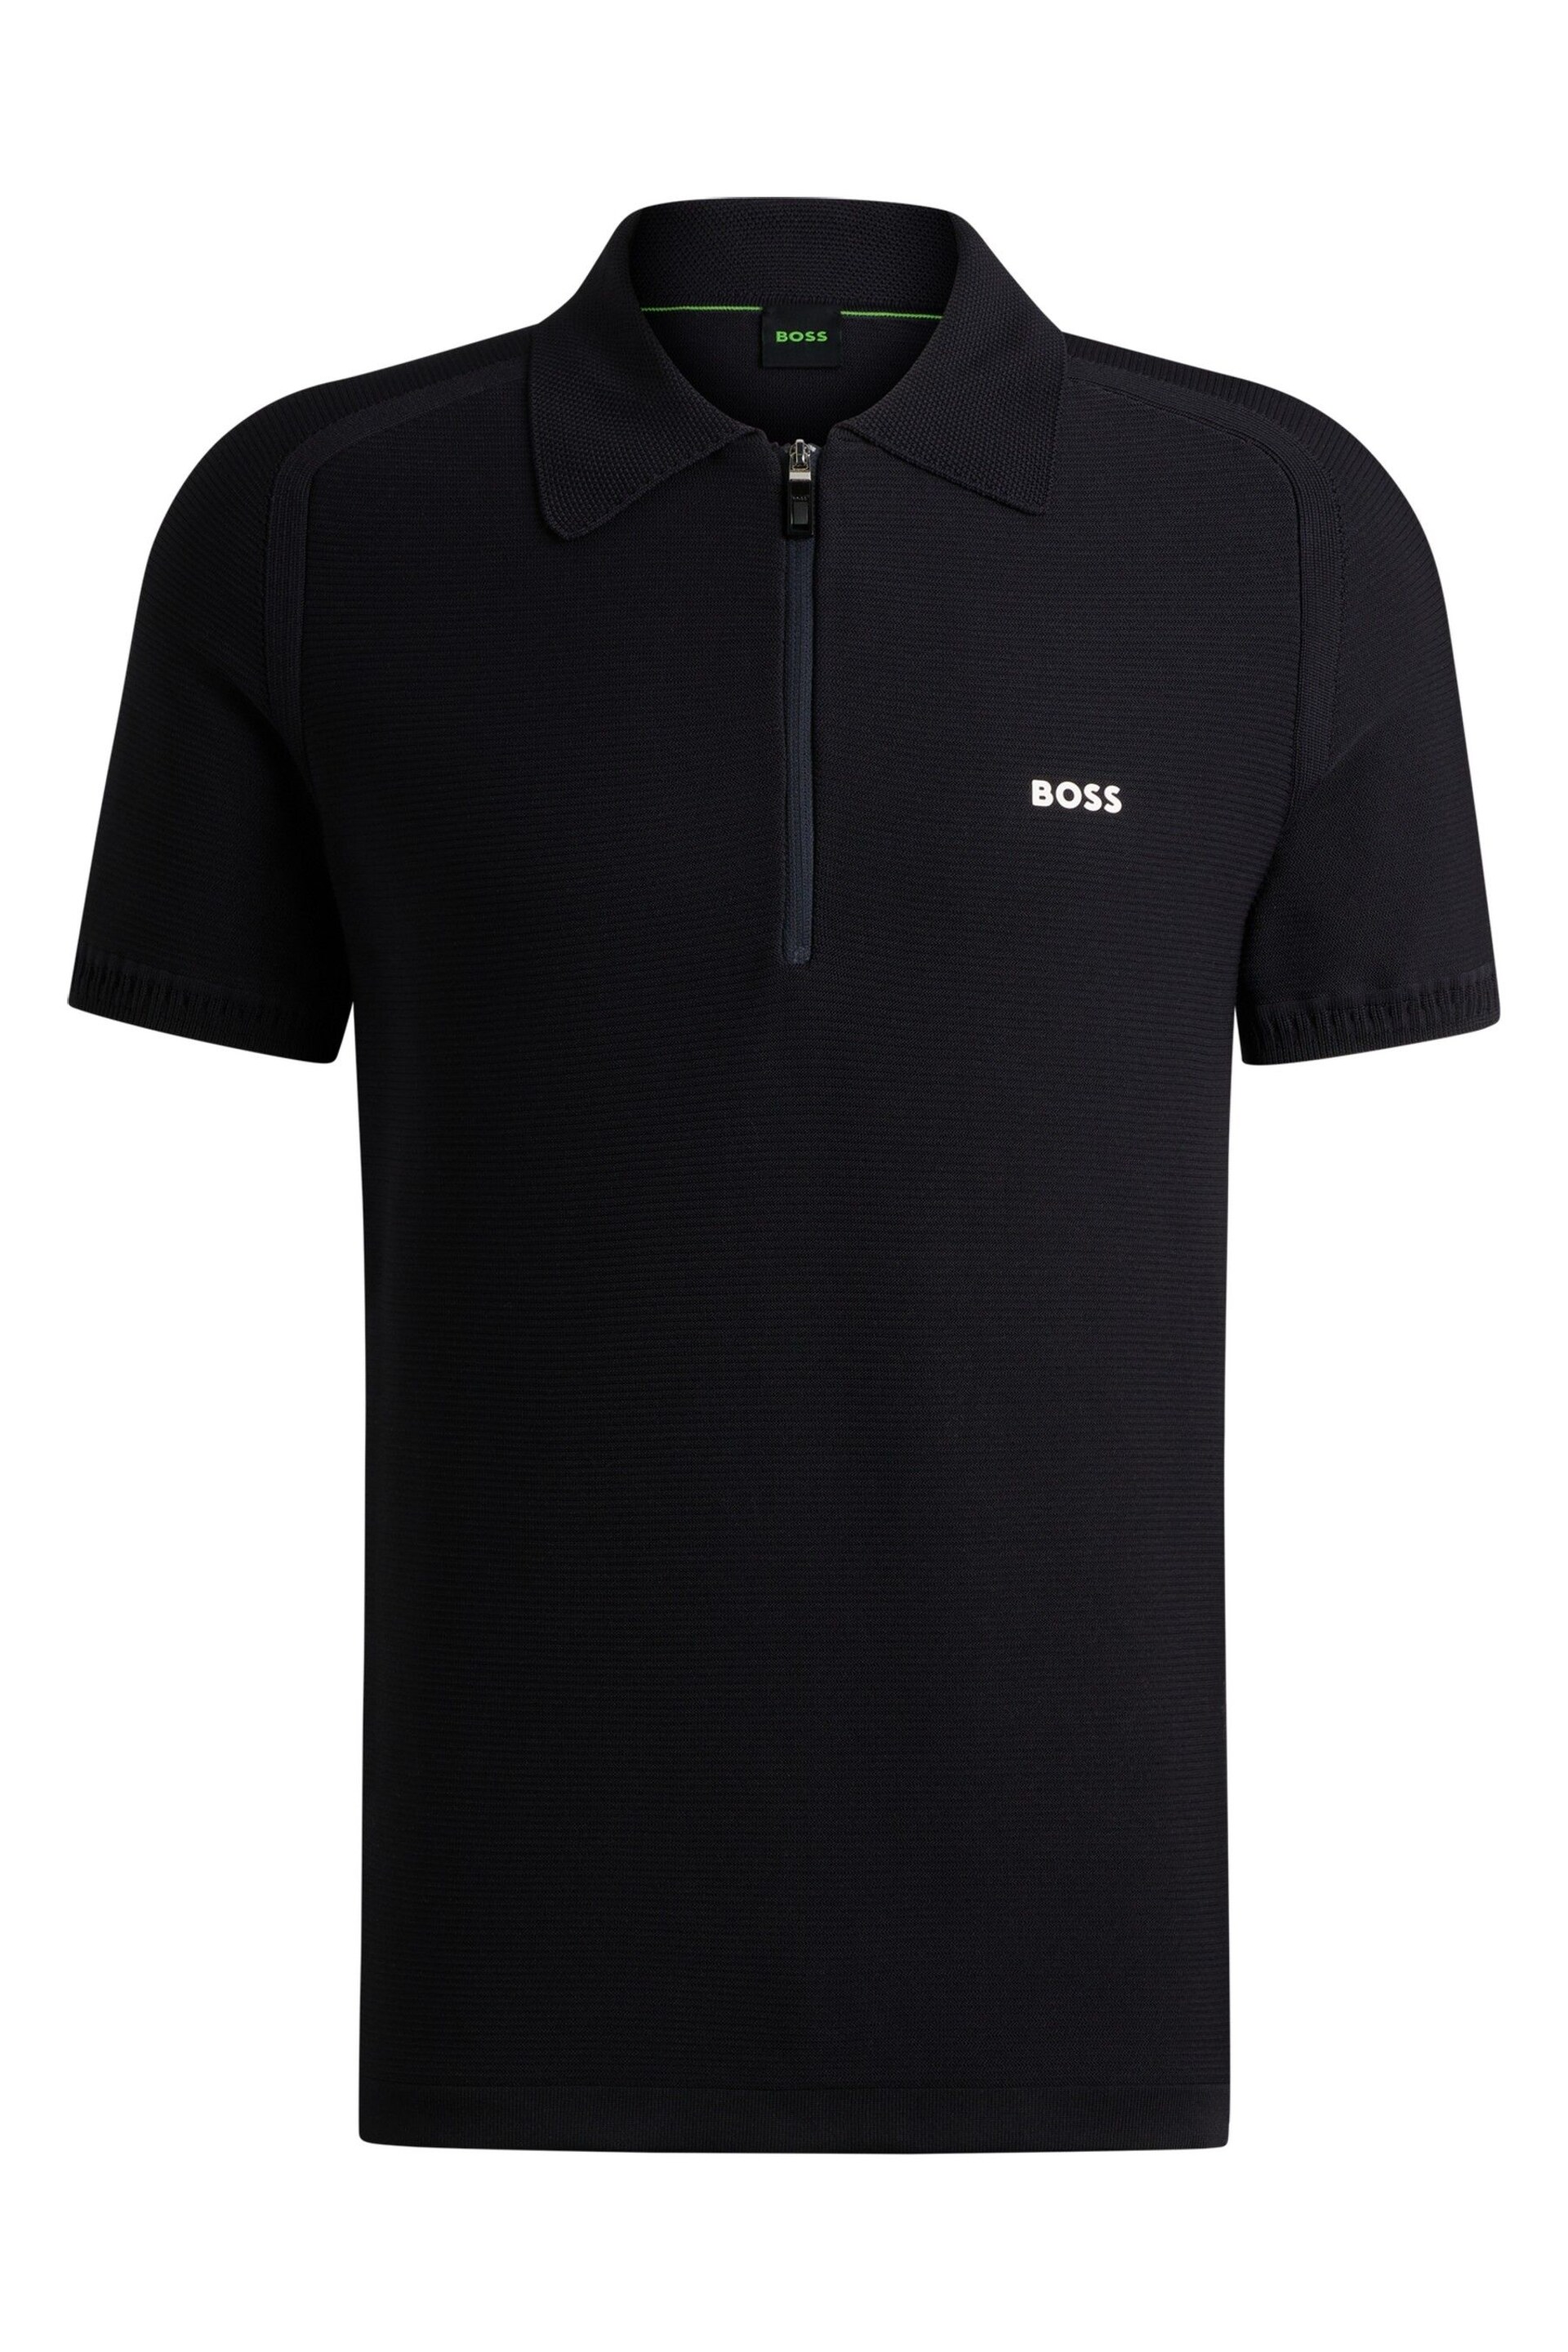 BOSS Dark Blue Short-Sleeved Zip-Neck Polo Sweater With Logo Detail - Image 5 of 5